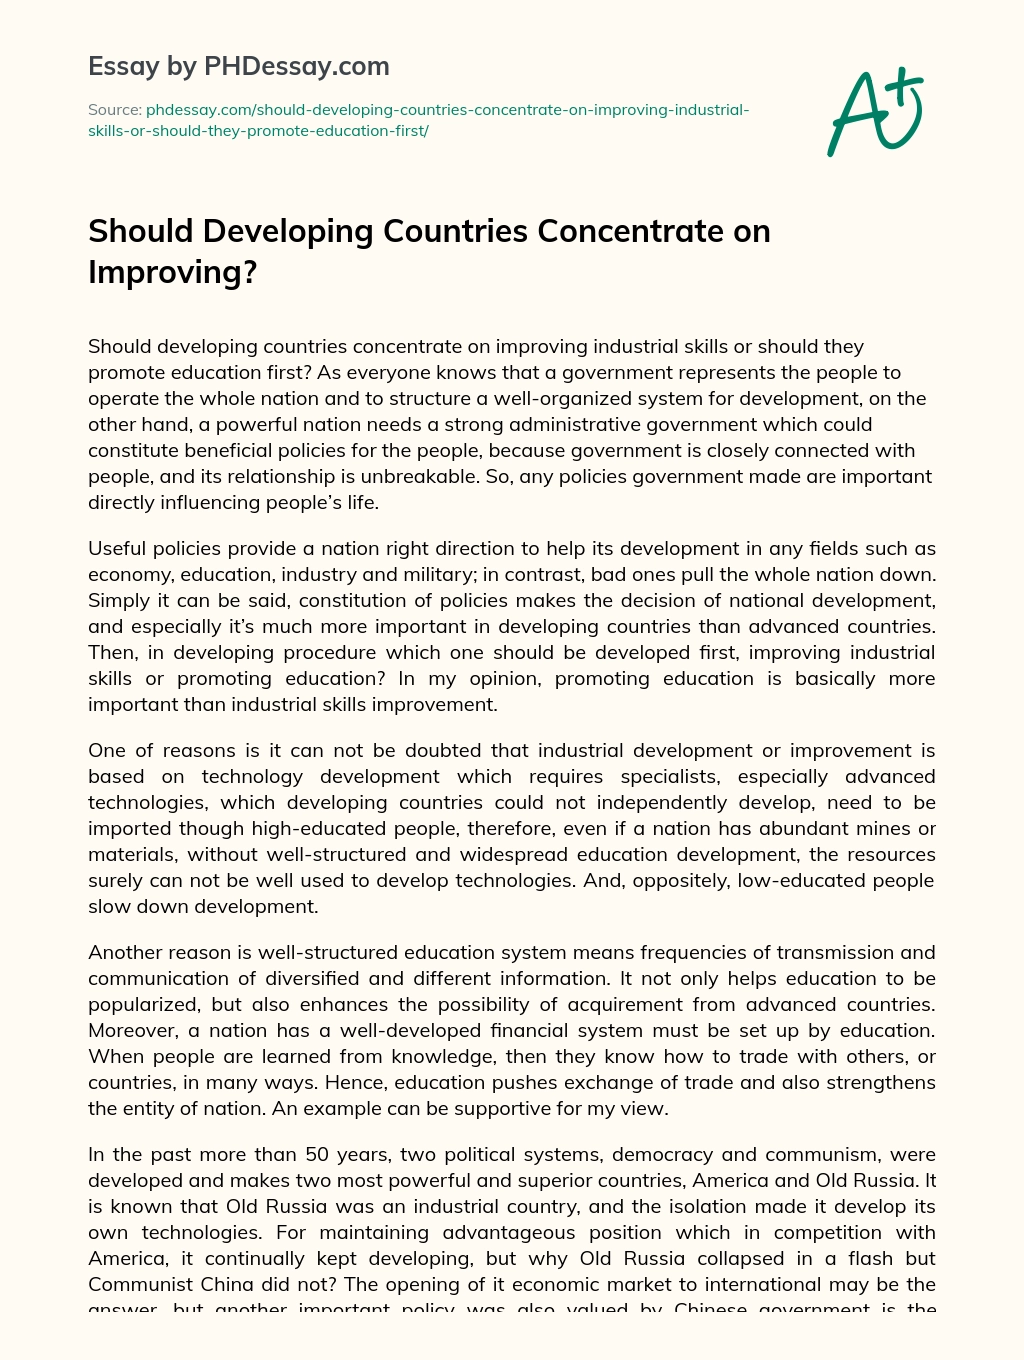 Should Developing Countries Concentrate on Improving? essay